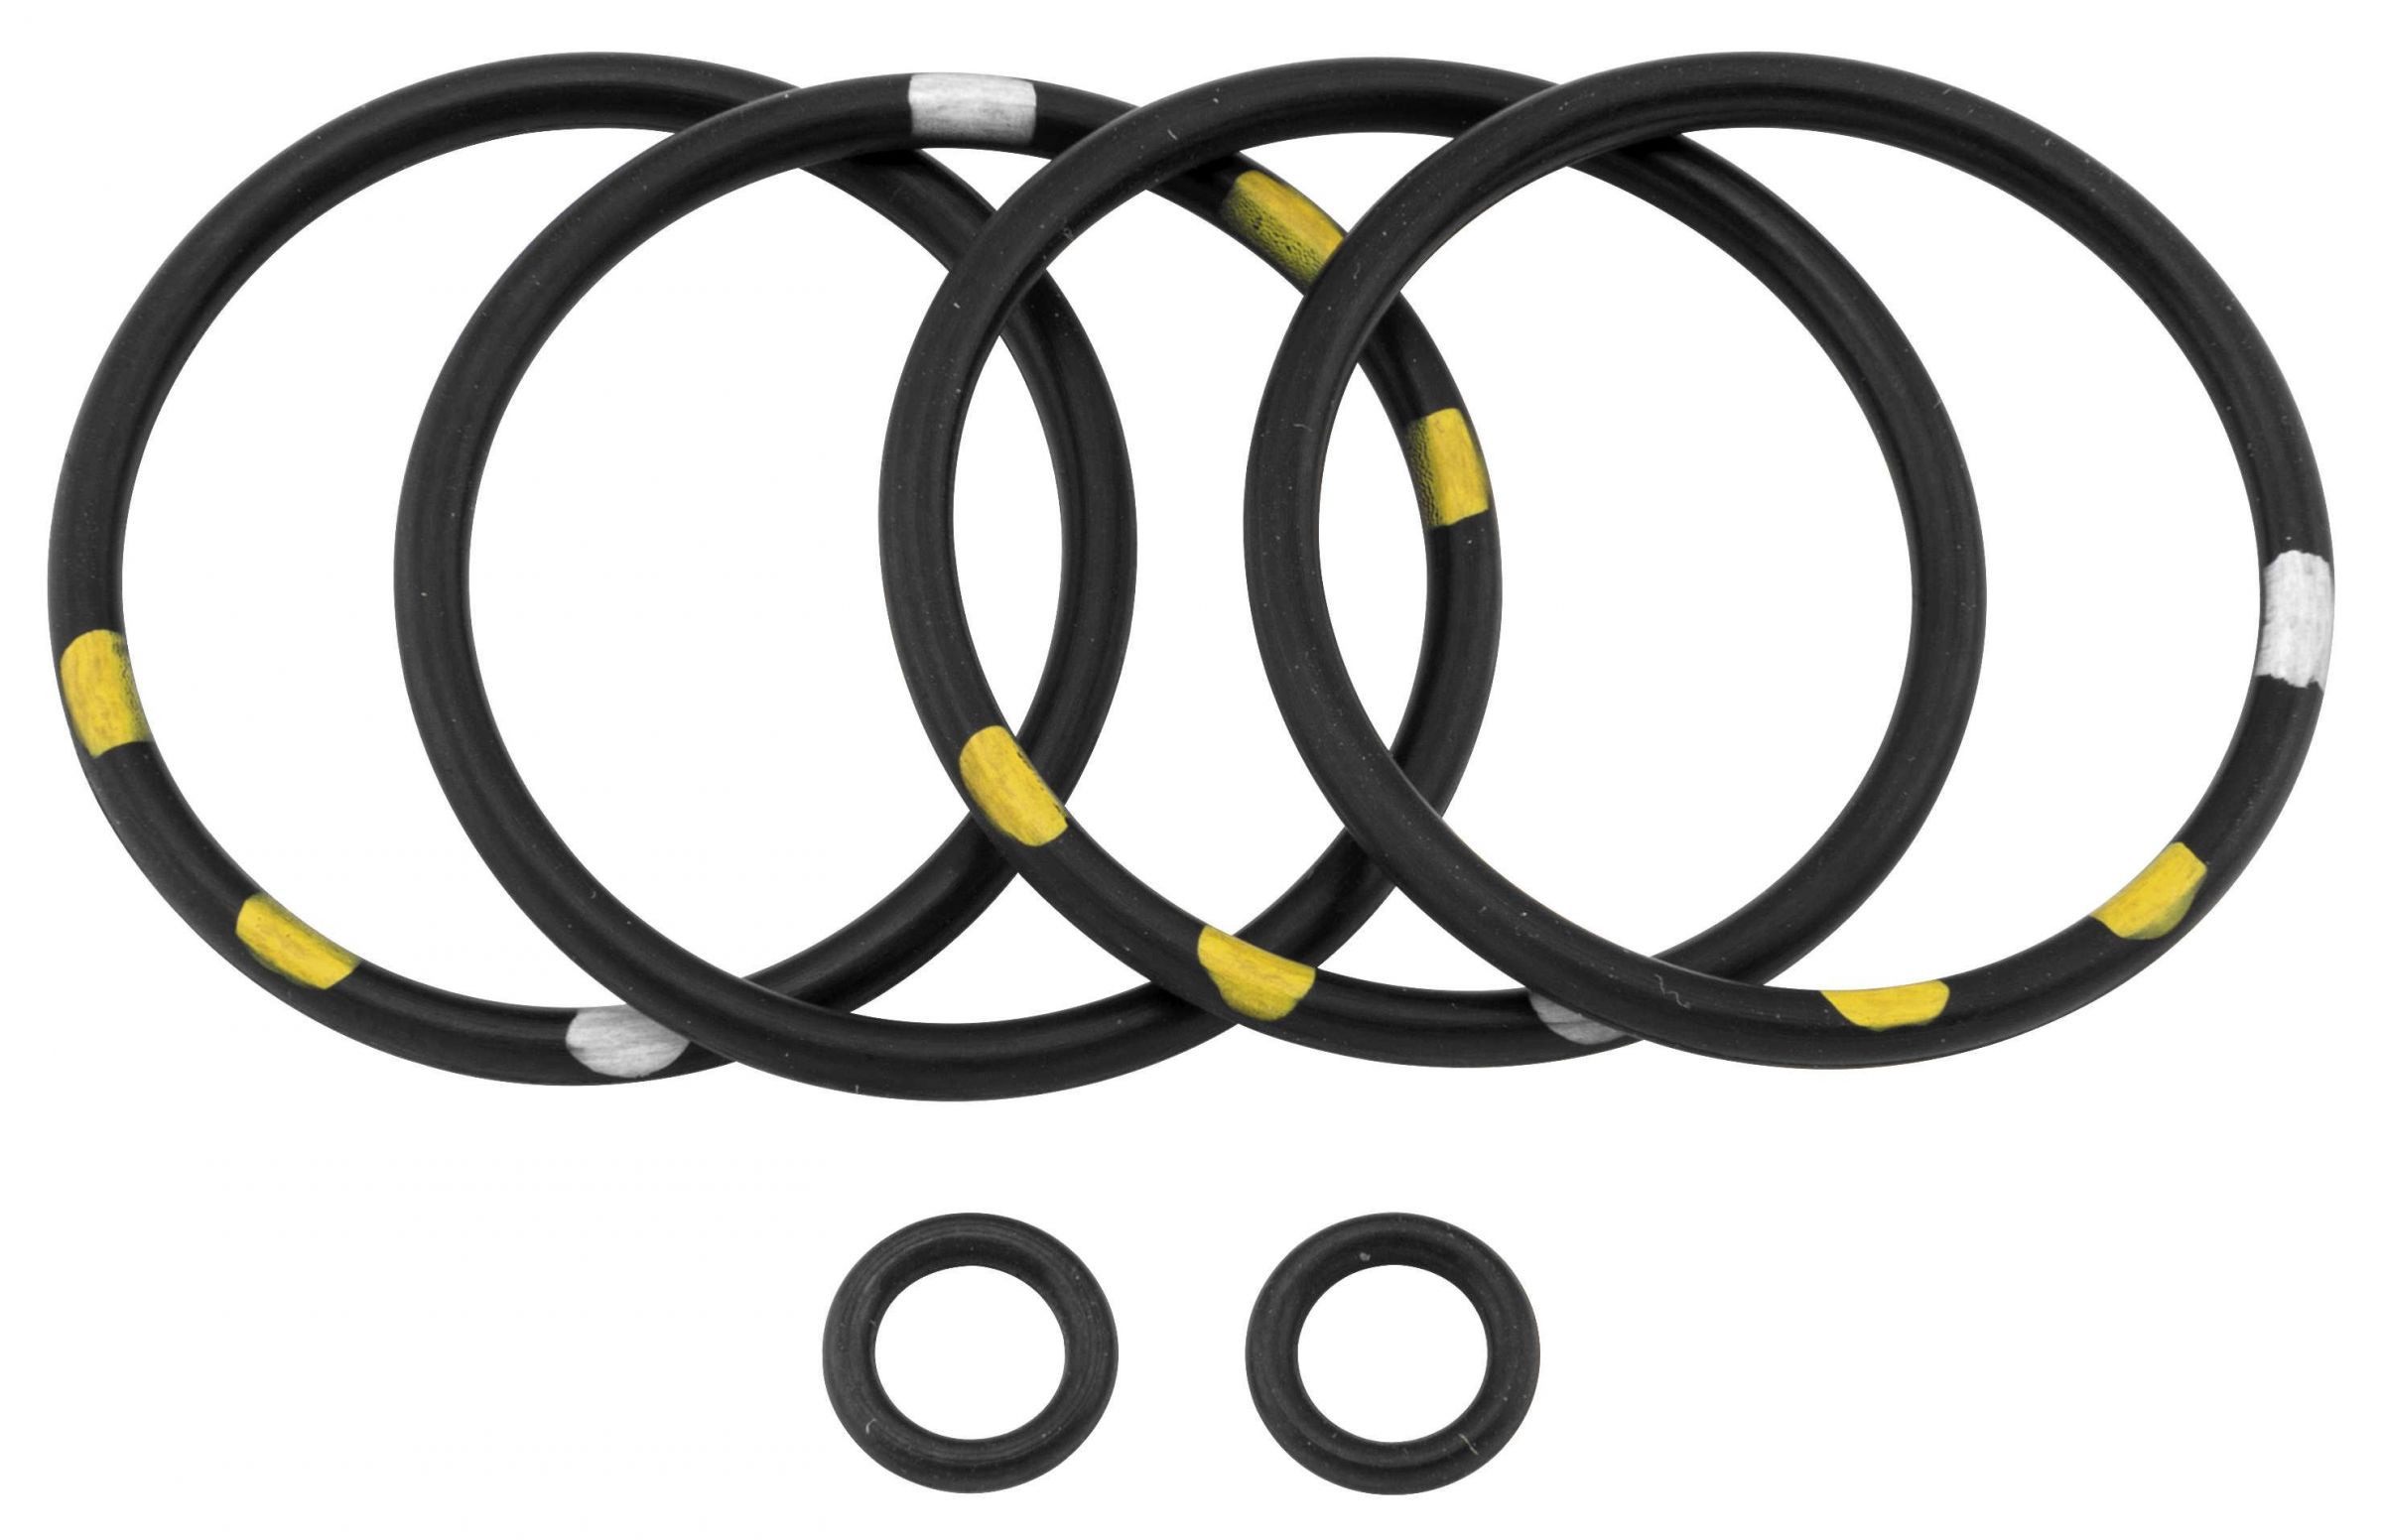 1SYQ-GMA-GMA-RB4 Replacement O-Ring Seal Kit for F Calipers